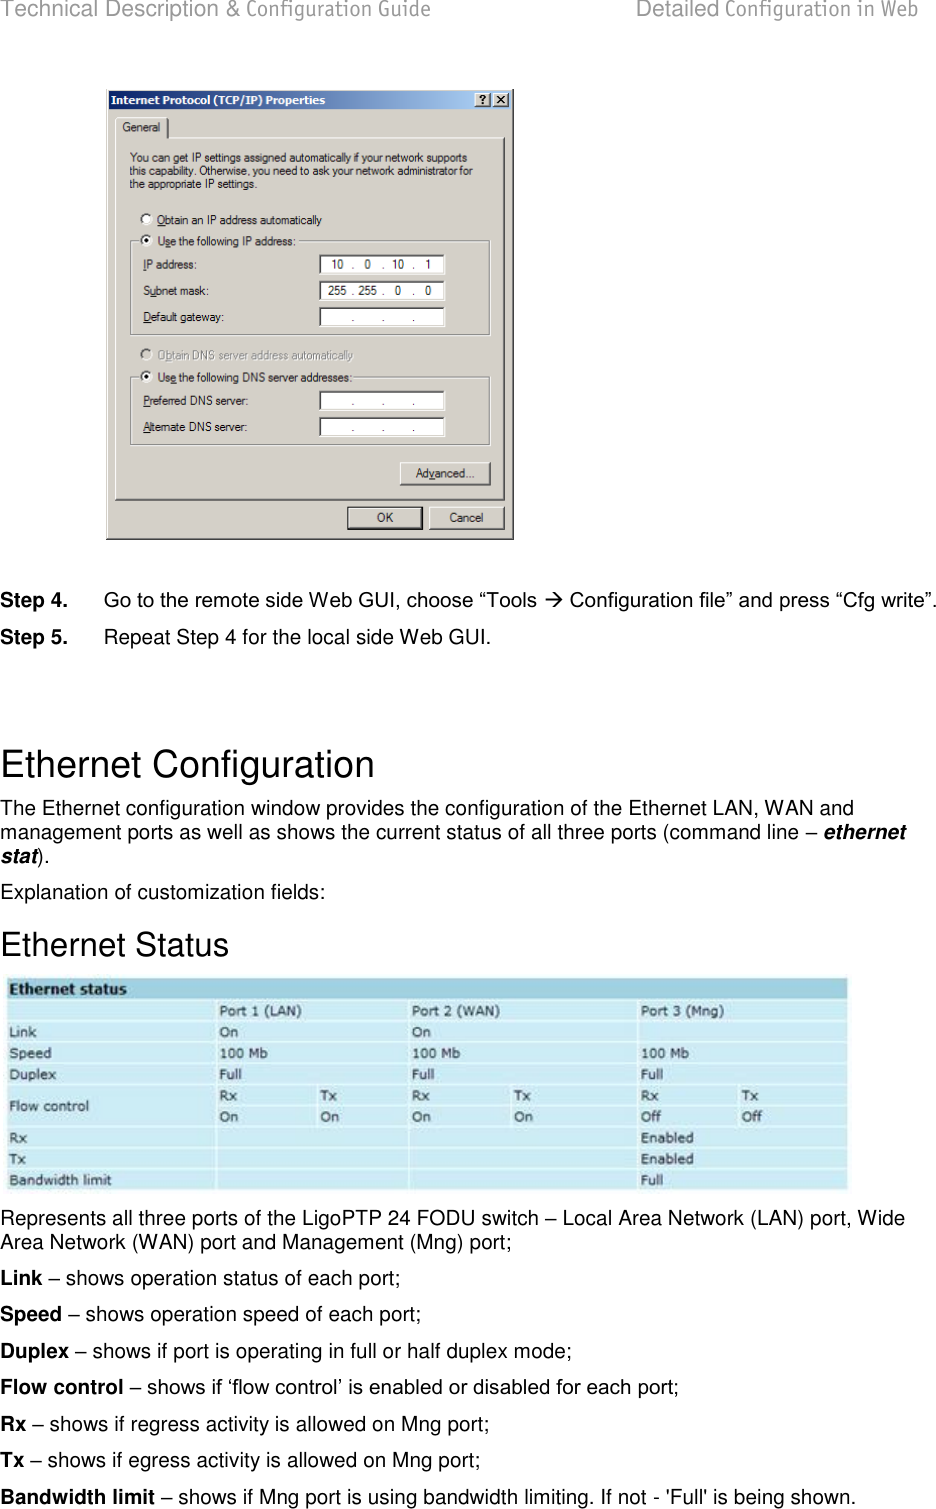 Technical Description &amp; Configuration Guide  Detailed Configuration in Web  LigoWave  Page 47   Step 4.   Step 5.   Repeat Step 4 for the local side Web GUI.   Ethernet Configuration The Ethernet configuration window provides the configuration of the Ethernet LAN, WAN and management ports as well as shows the current status of all three ports (command line  ethernet stat). Explanation of customization fields: Ethernet Status  Represents all three ports of the LigoPTP 24 FODU switch  Local Area Network (LAN) port, Wide Area Network (WAN) port and Management (Mng) port; Link  shows operation status of each port; Speed  shows operation speed of each port; Duplex  shows if port is operating in full or half duplex mode; Flow control   Rx  shows if regress activity is allowed on Mng port; Tx  shows if egress activity is allowed on Mng port; Bandwidth limit  shows if Mng port is using bandwidth limiting. If not - &apos;Full&apos; is being shown.   